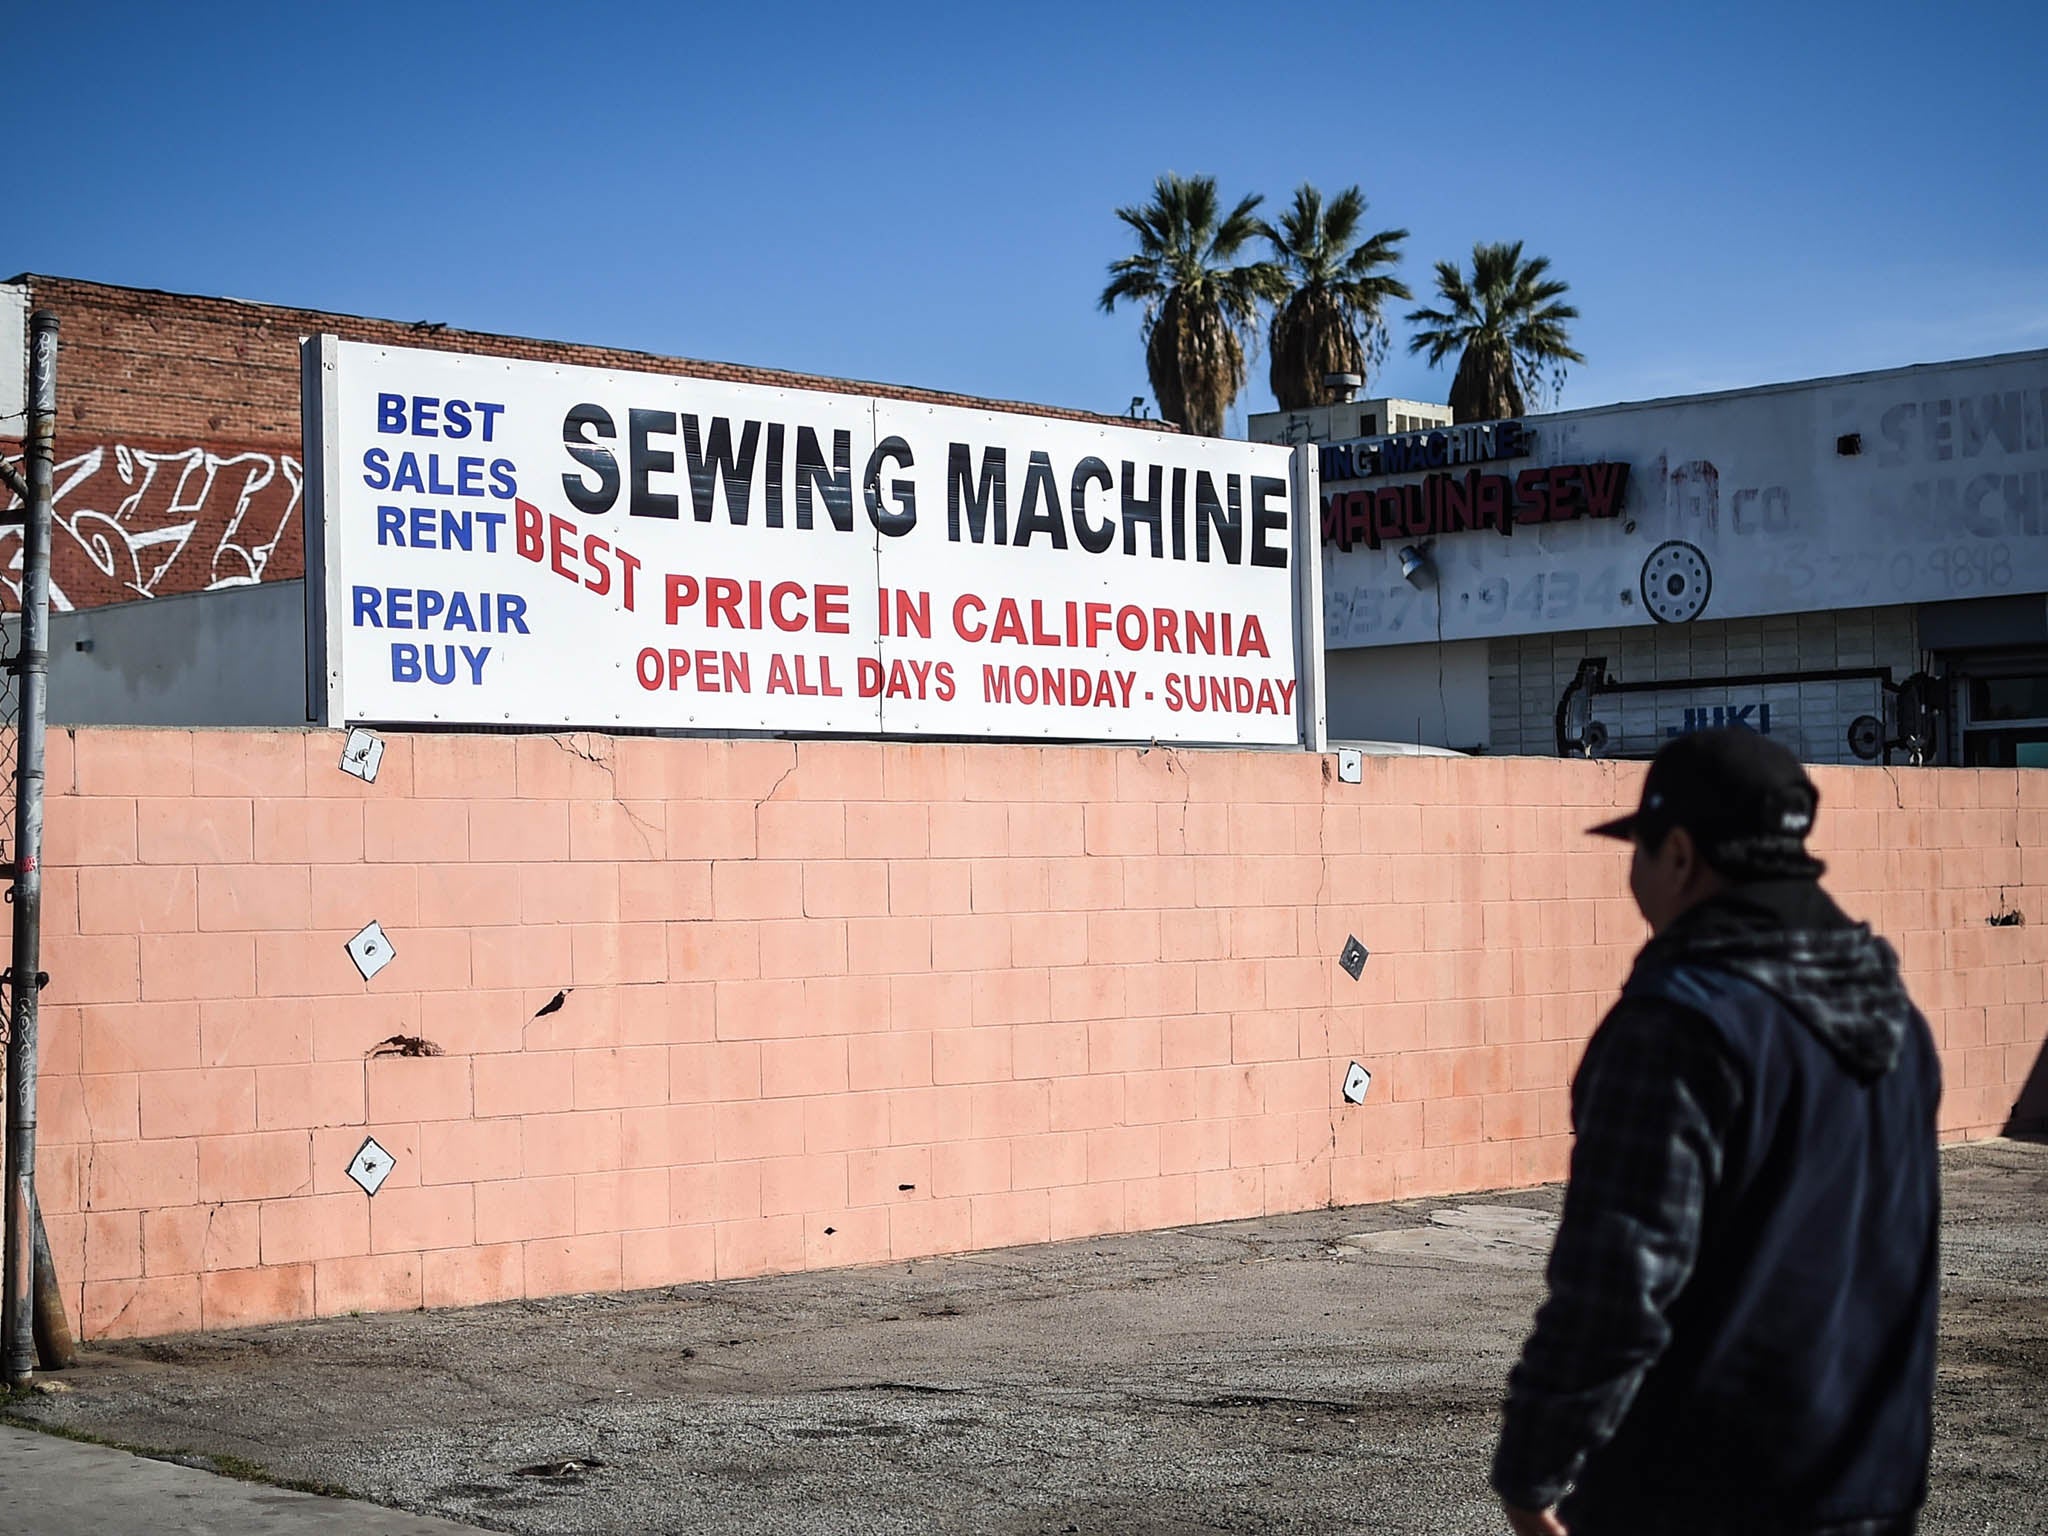 A man walks past a factory in the Garment District of Los Angeles